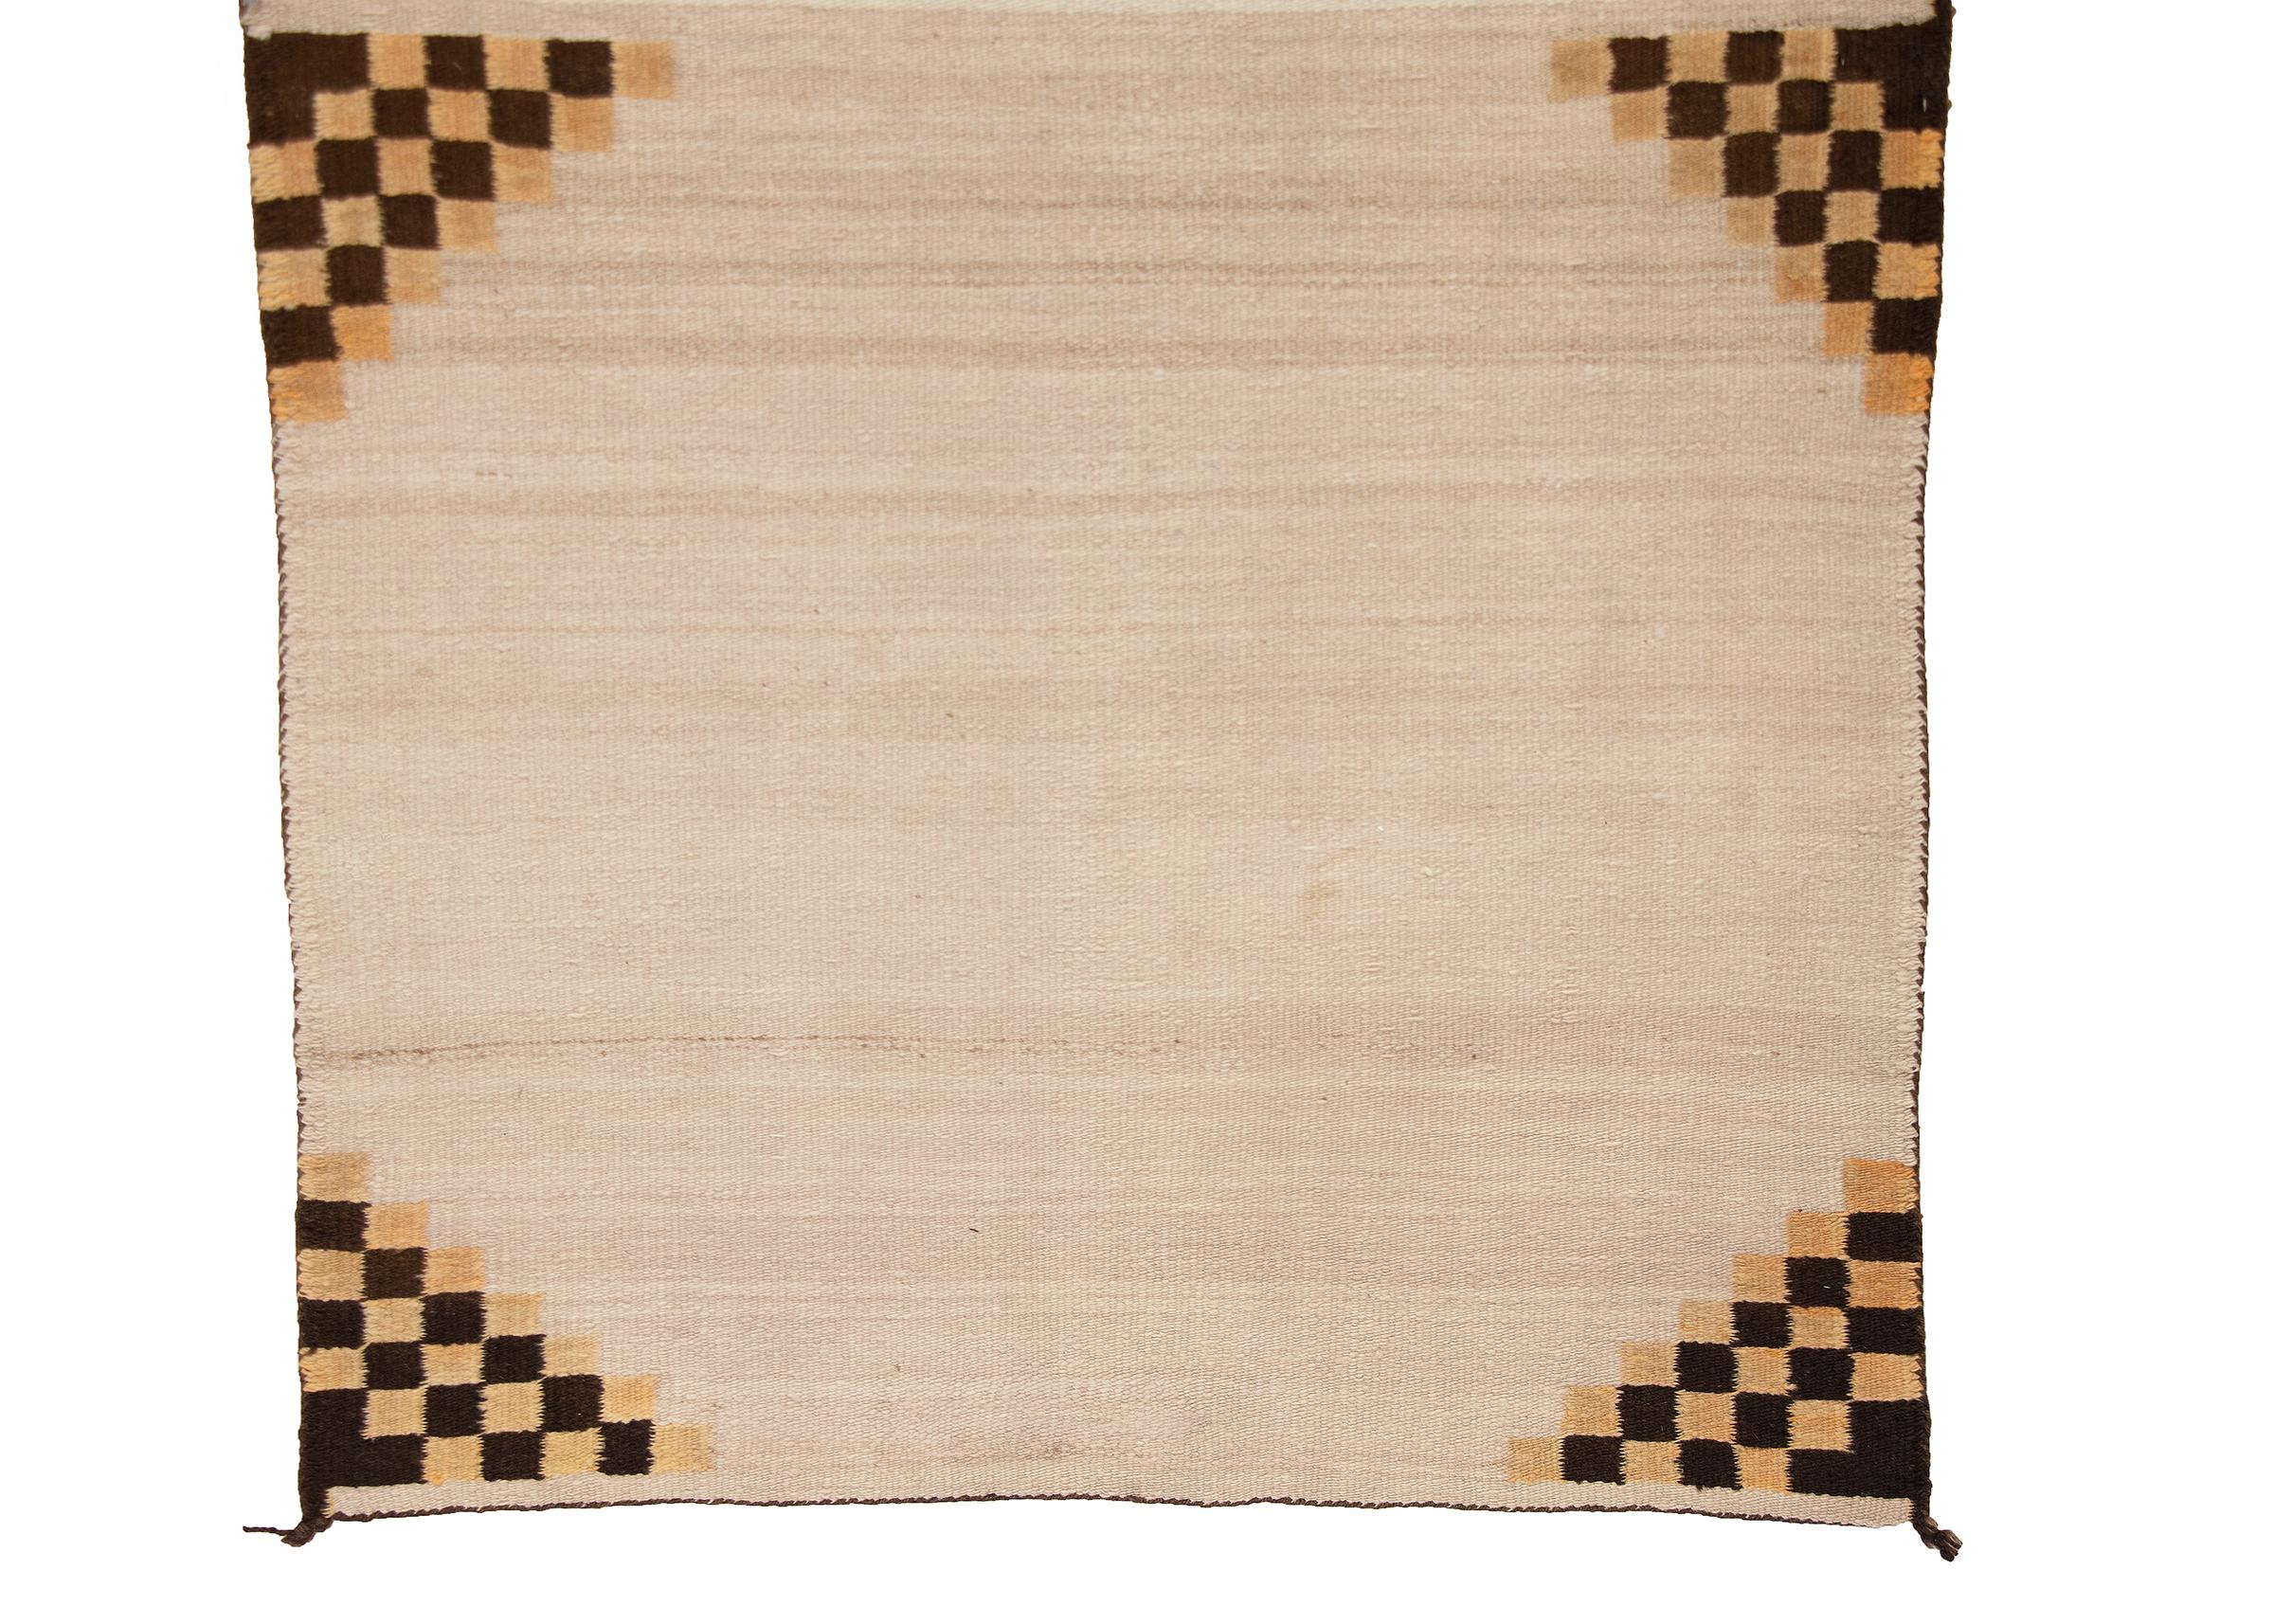 Native American Double Navajo Saddle Blanket with Split Design, Wool with Aniline Dyes